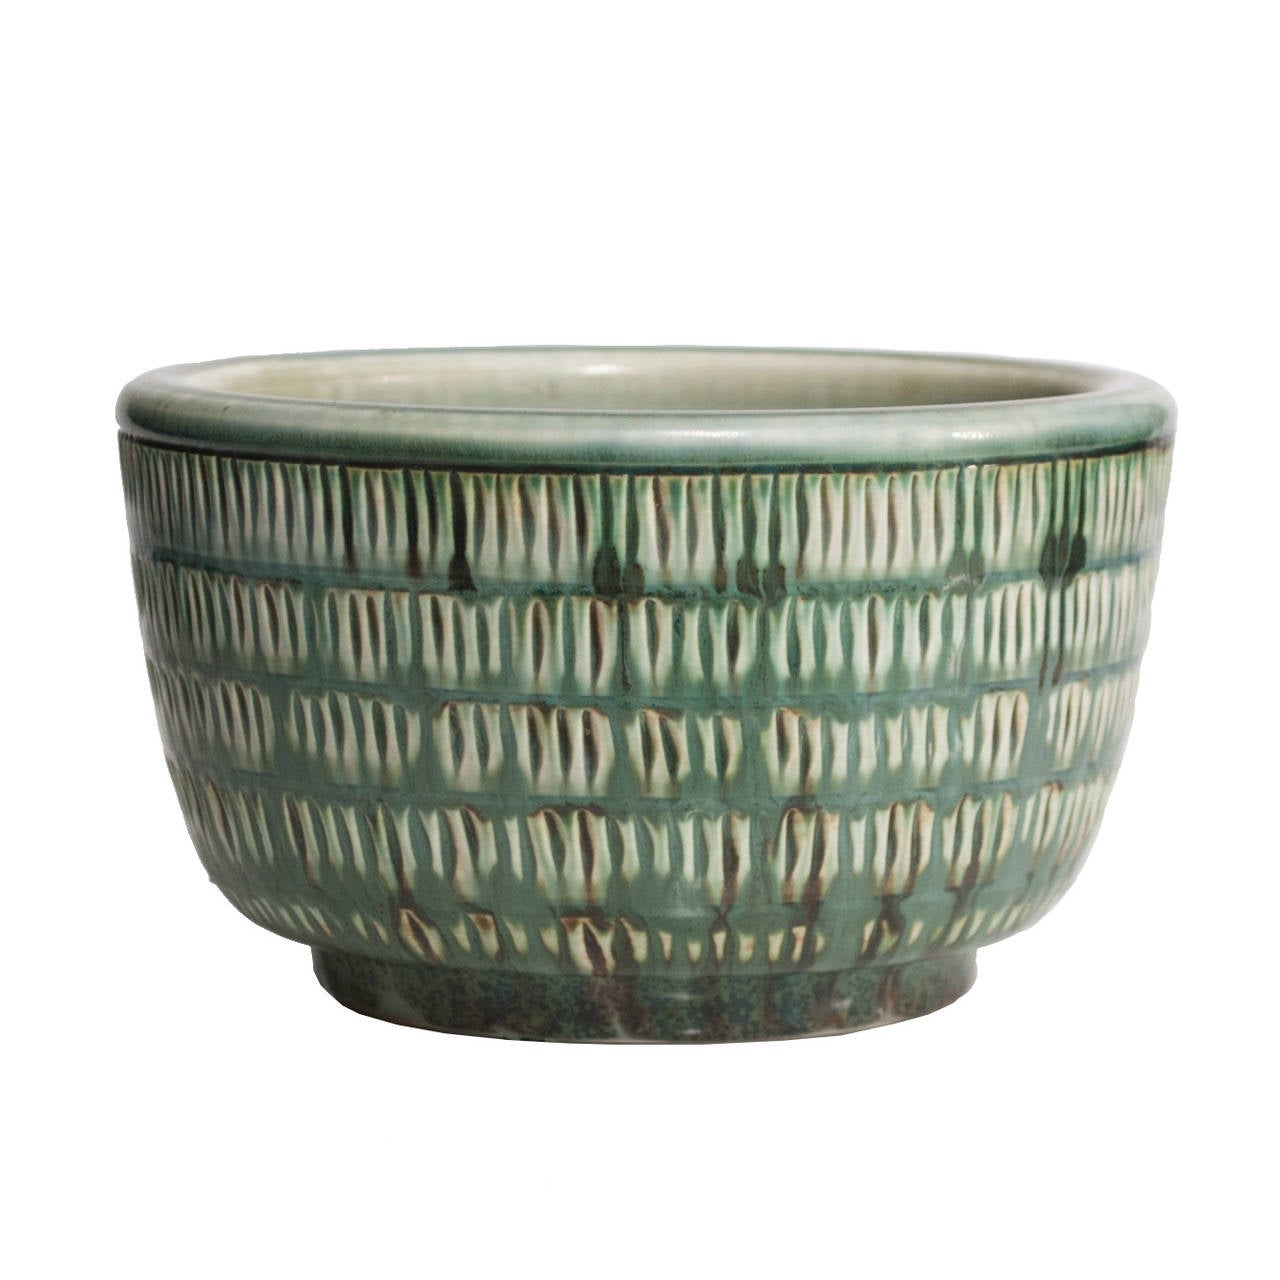 A Swedish art deco textured bowl with a blue / green glaze. Beautiful subtle form and glaze combination by designer Gertrud Löngren during her time at the Rorstrand company. 

Lonegren studied in Vienna and Stockholm during the 1920's, she worked